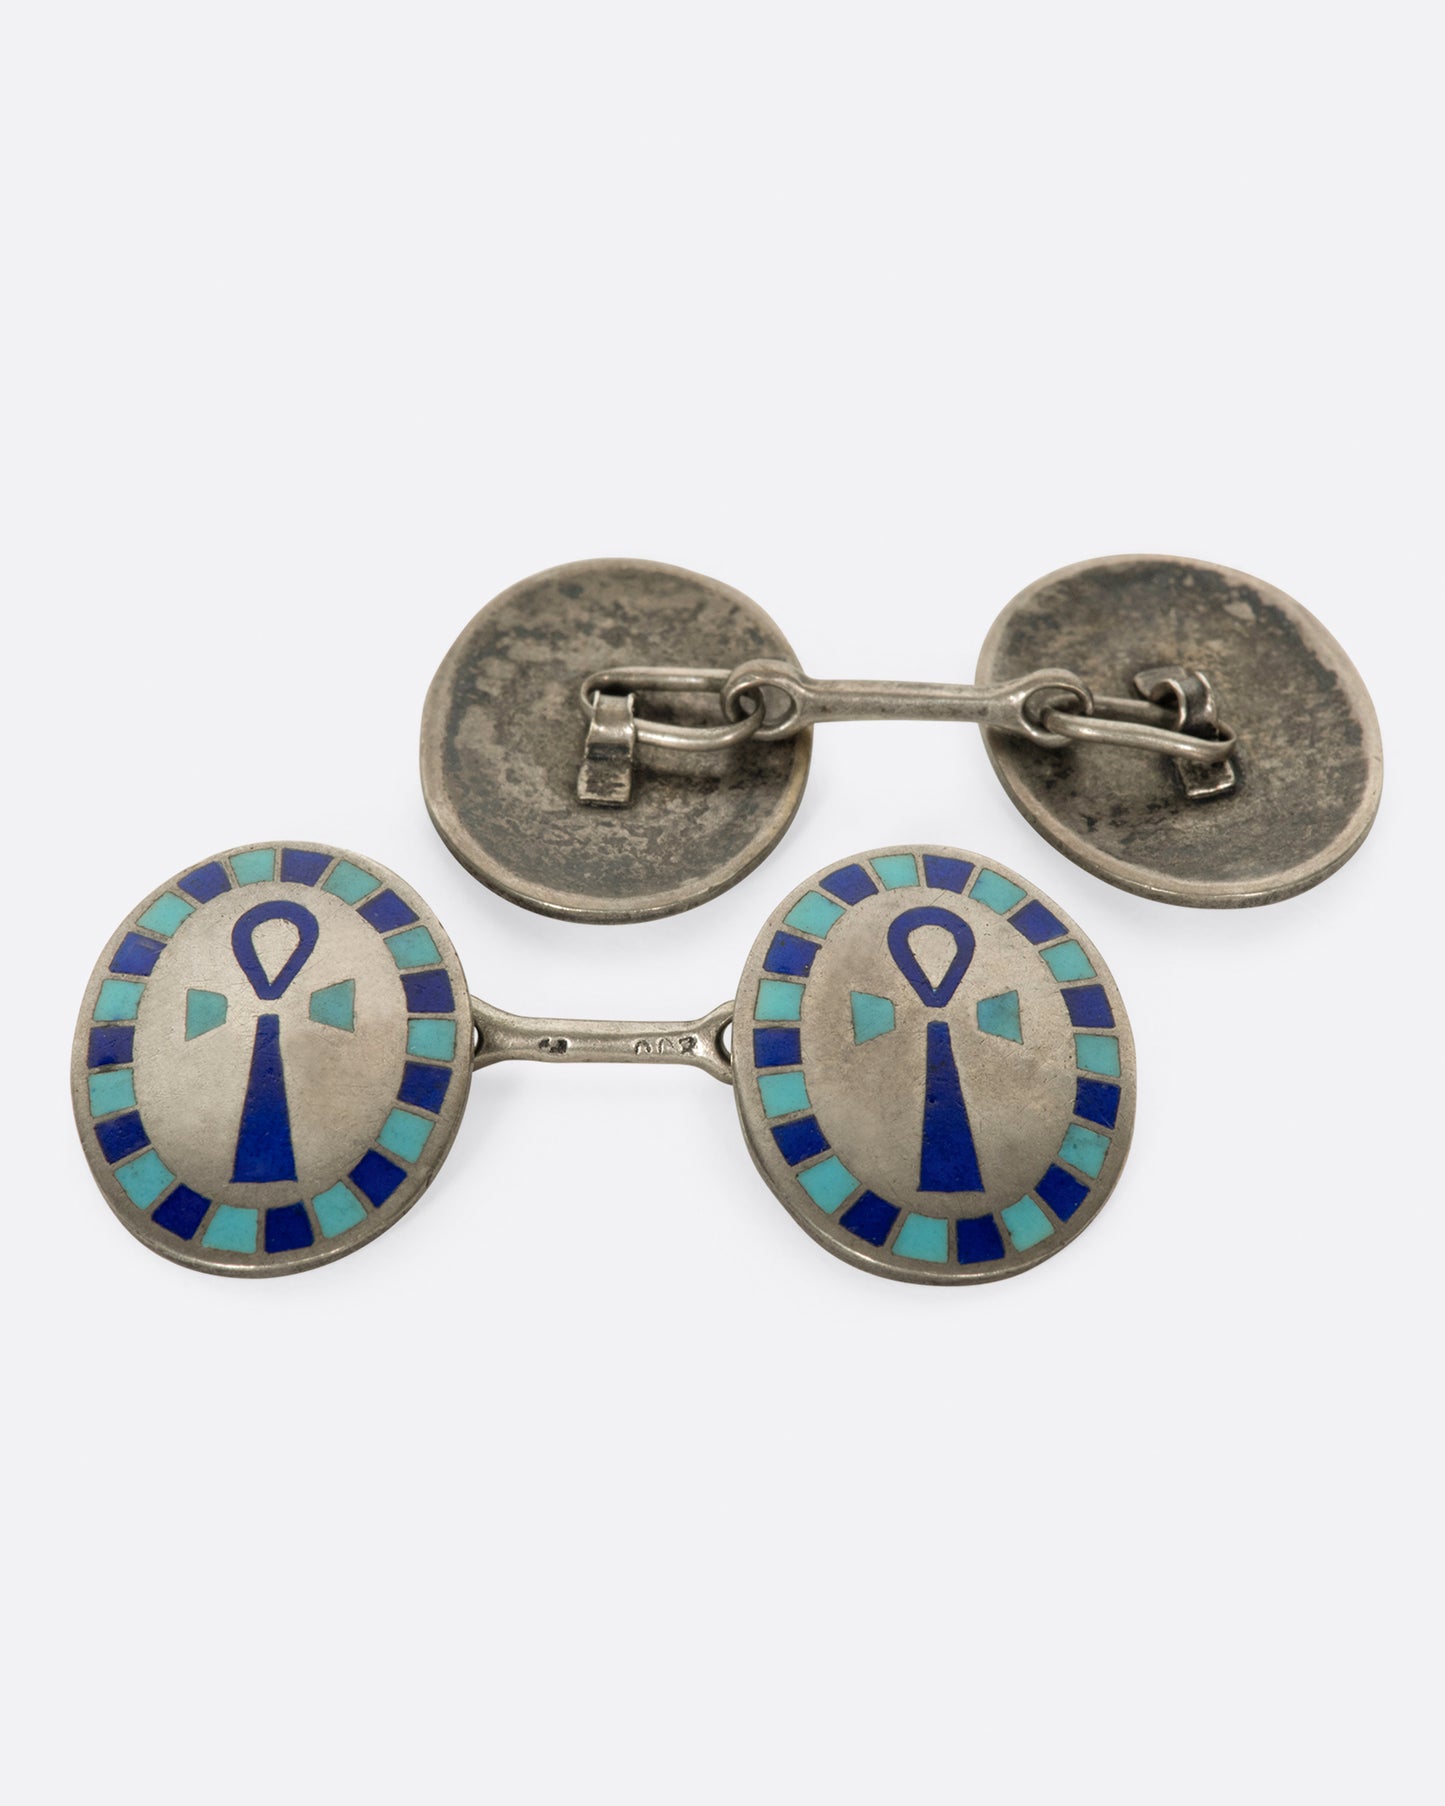 A pair of Egyptian Revival cufflinks featuring the Egyptian symbol of life, the ankh.